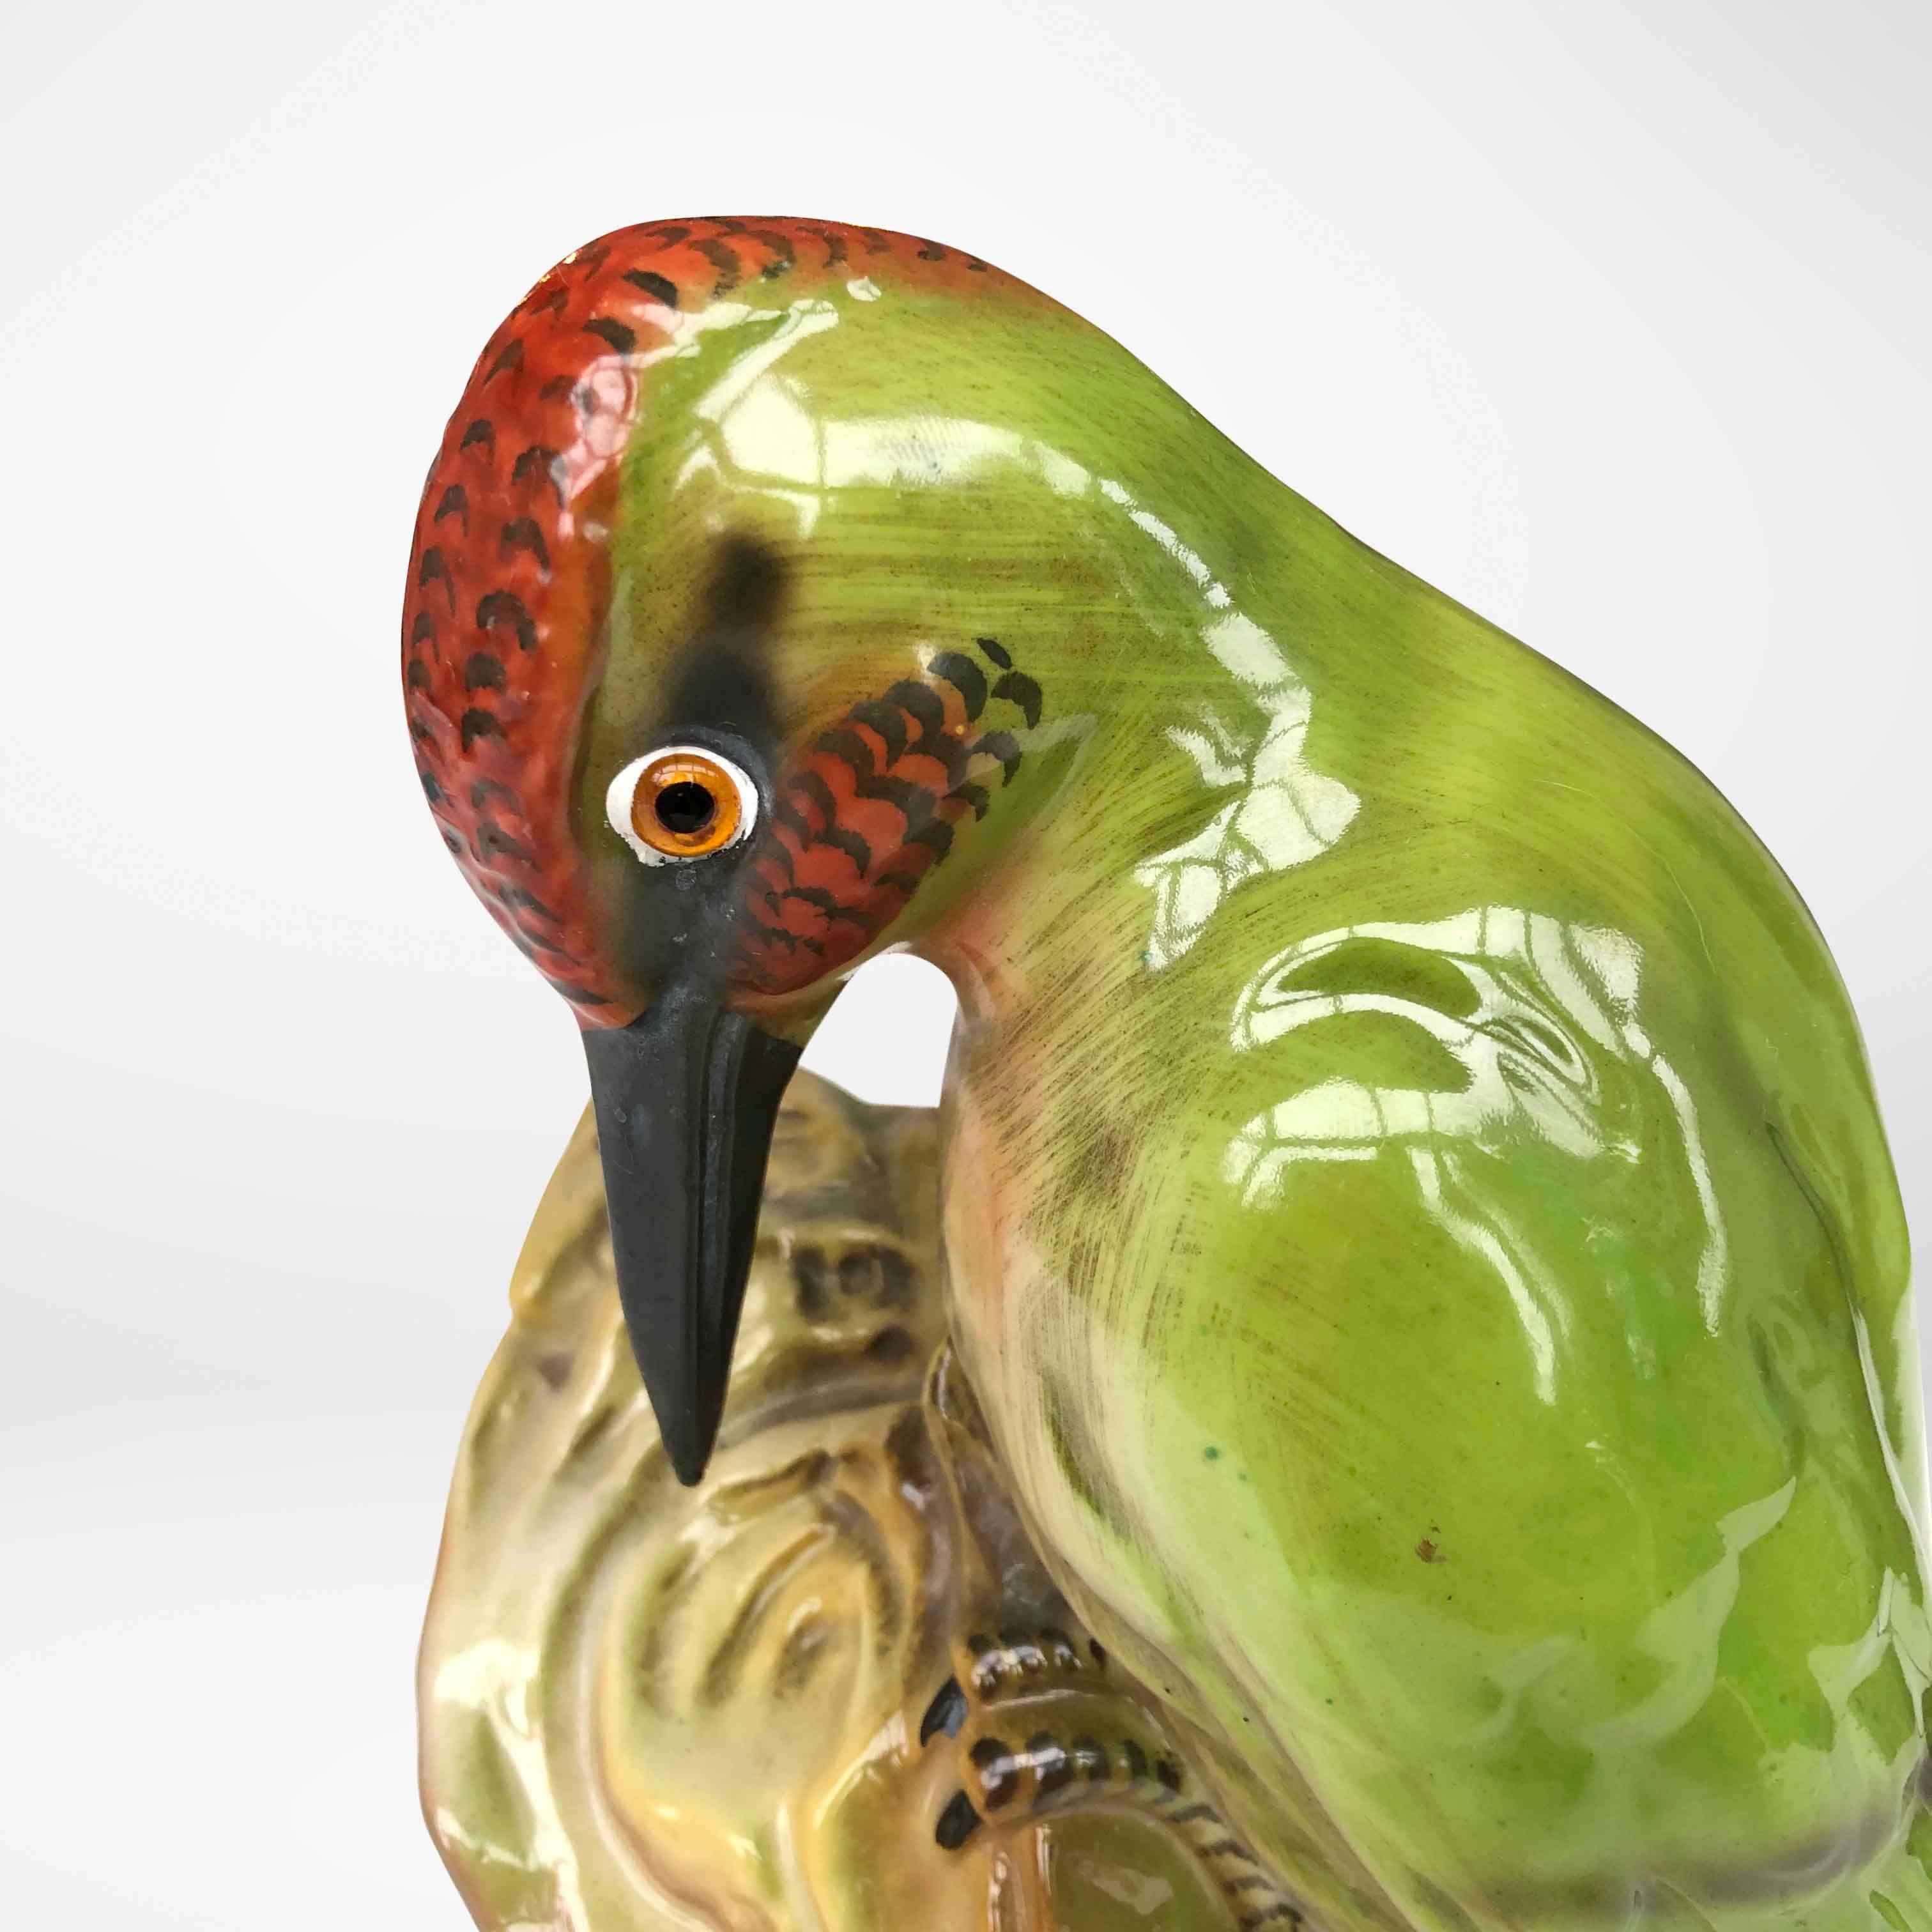 Cute lamp in porcelain of a woodpecker. These lamps were produced in the past in the shape of all kinds of animals and used as a fragrance or perfume lamp to combat the smell of cigarette smoke. The lamp is in perfect condition, and has beautiful